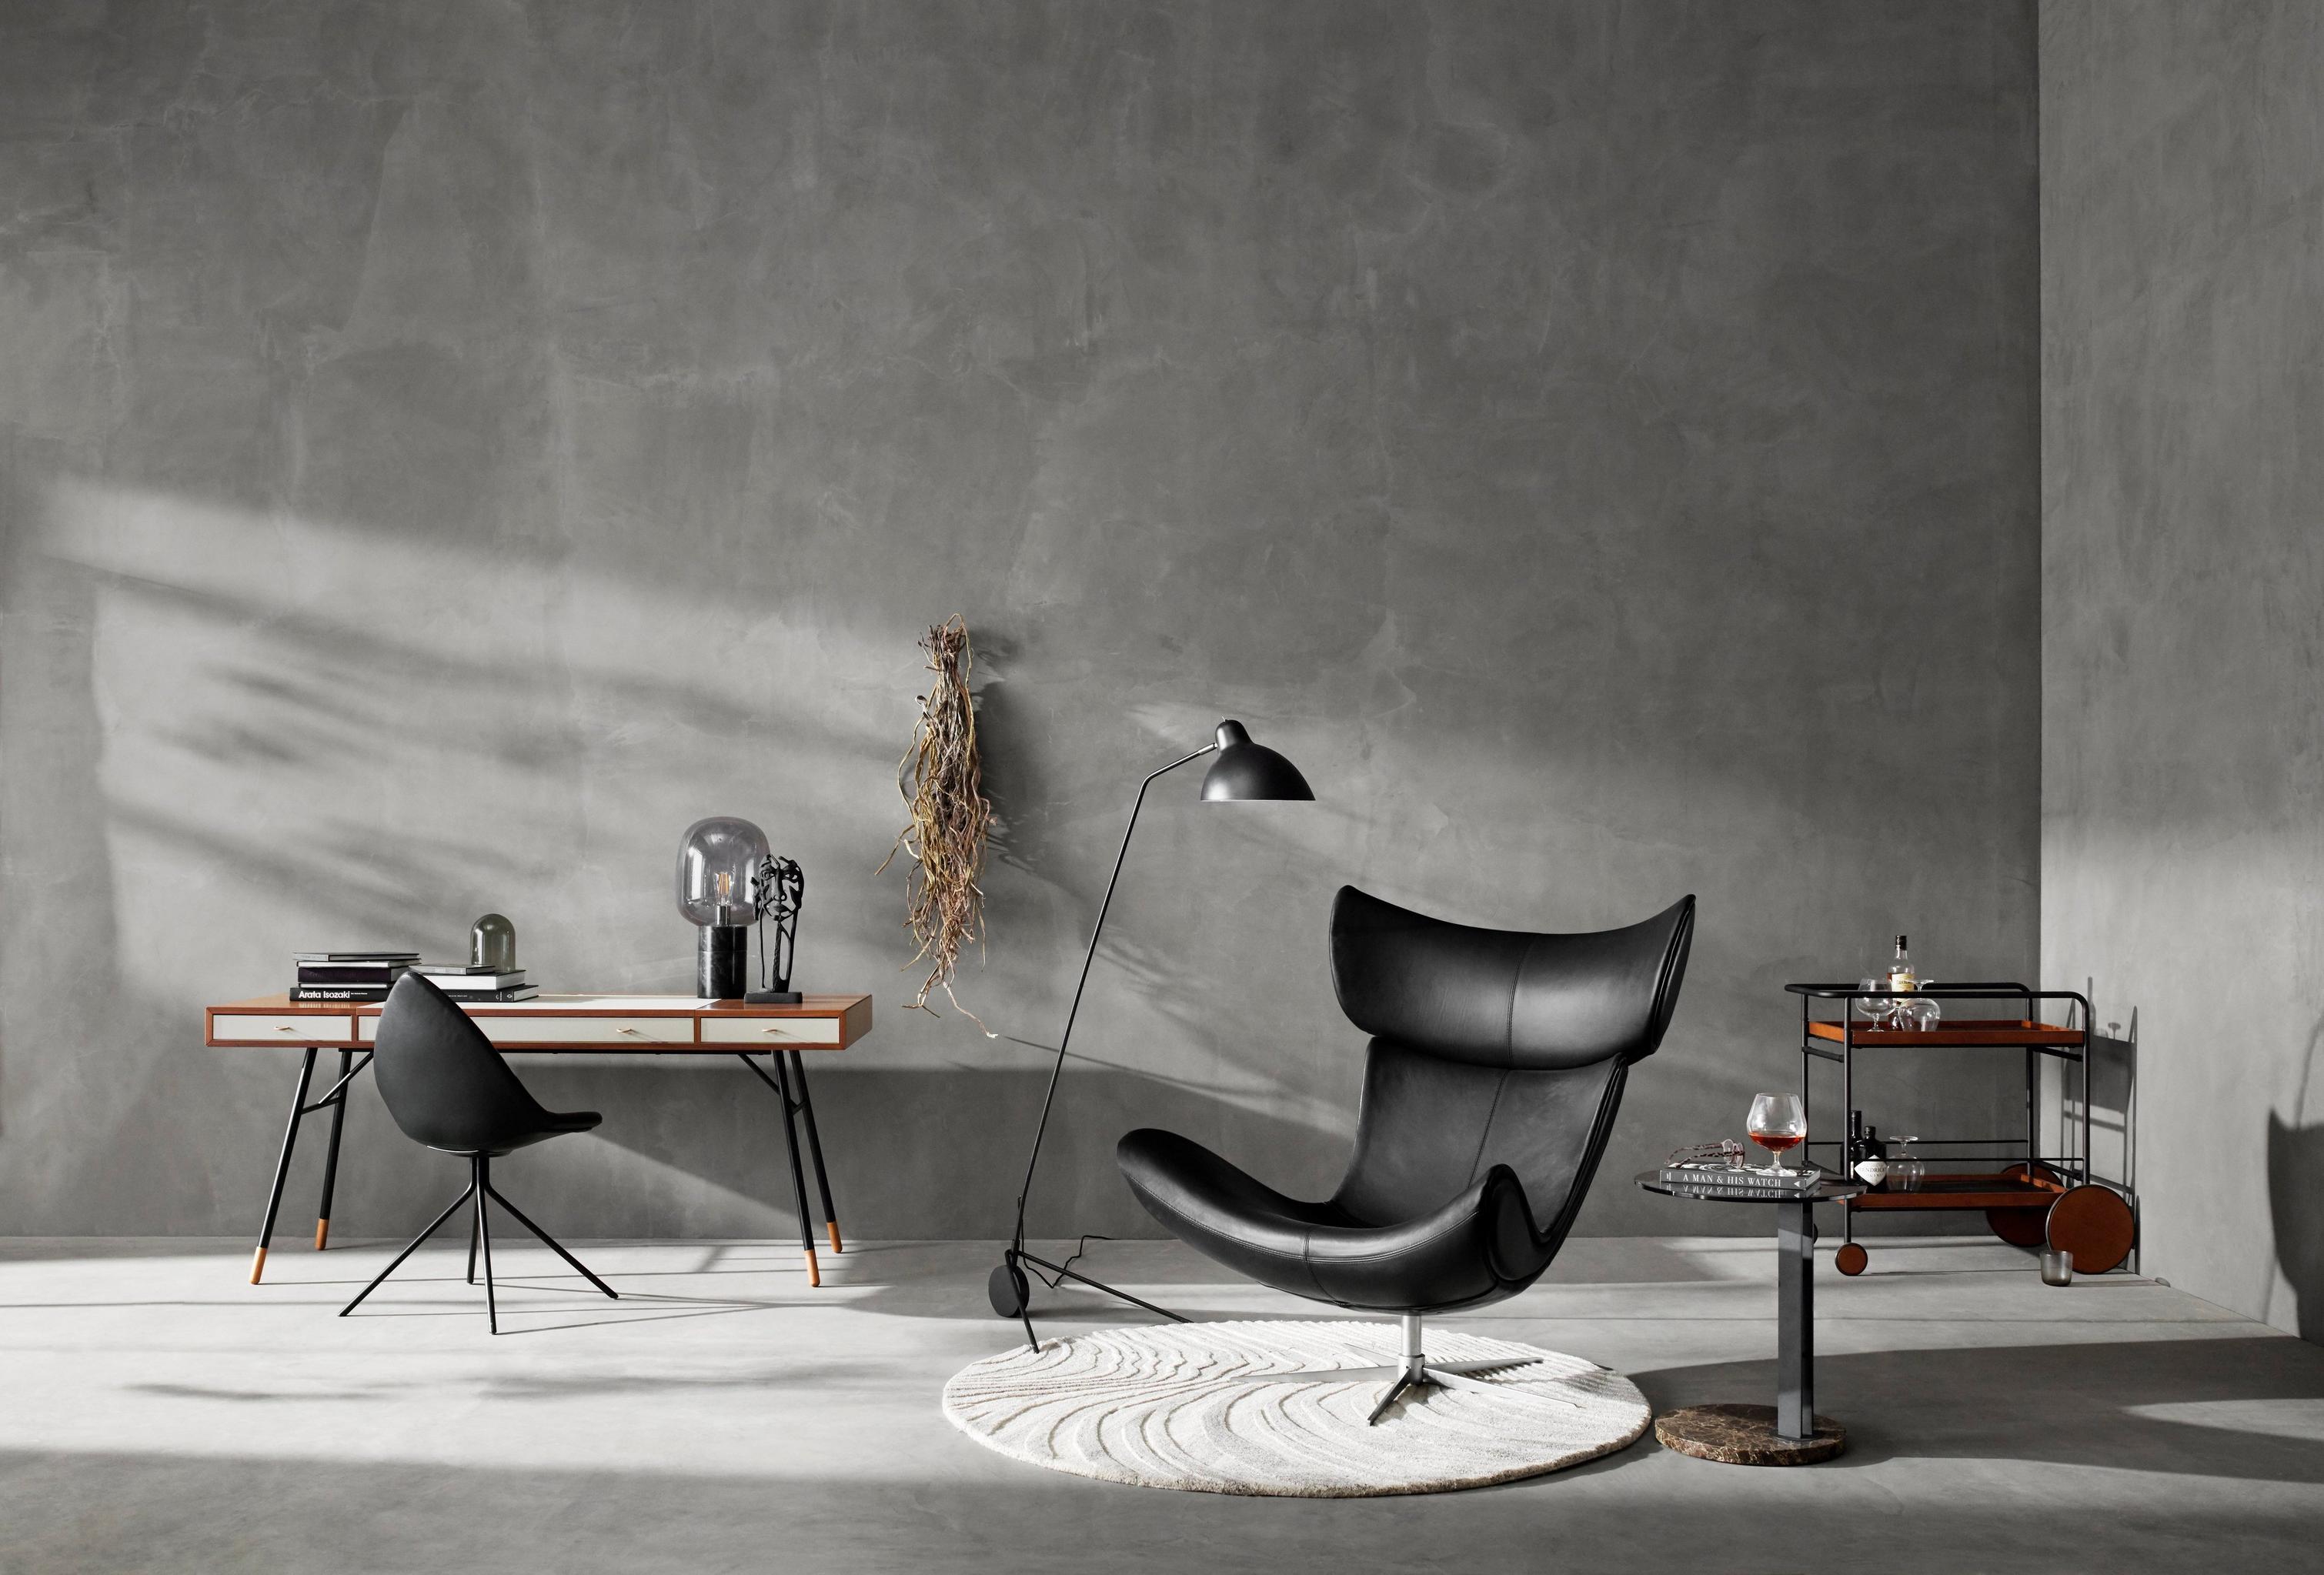 Chic office space with a black lounge chair, desk, lamp, and shelving against a grey textured wall.